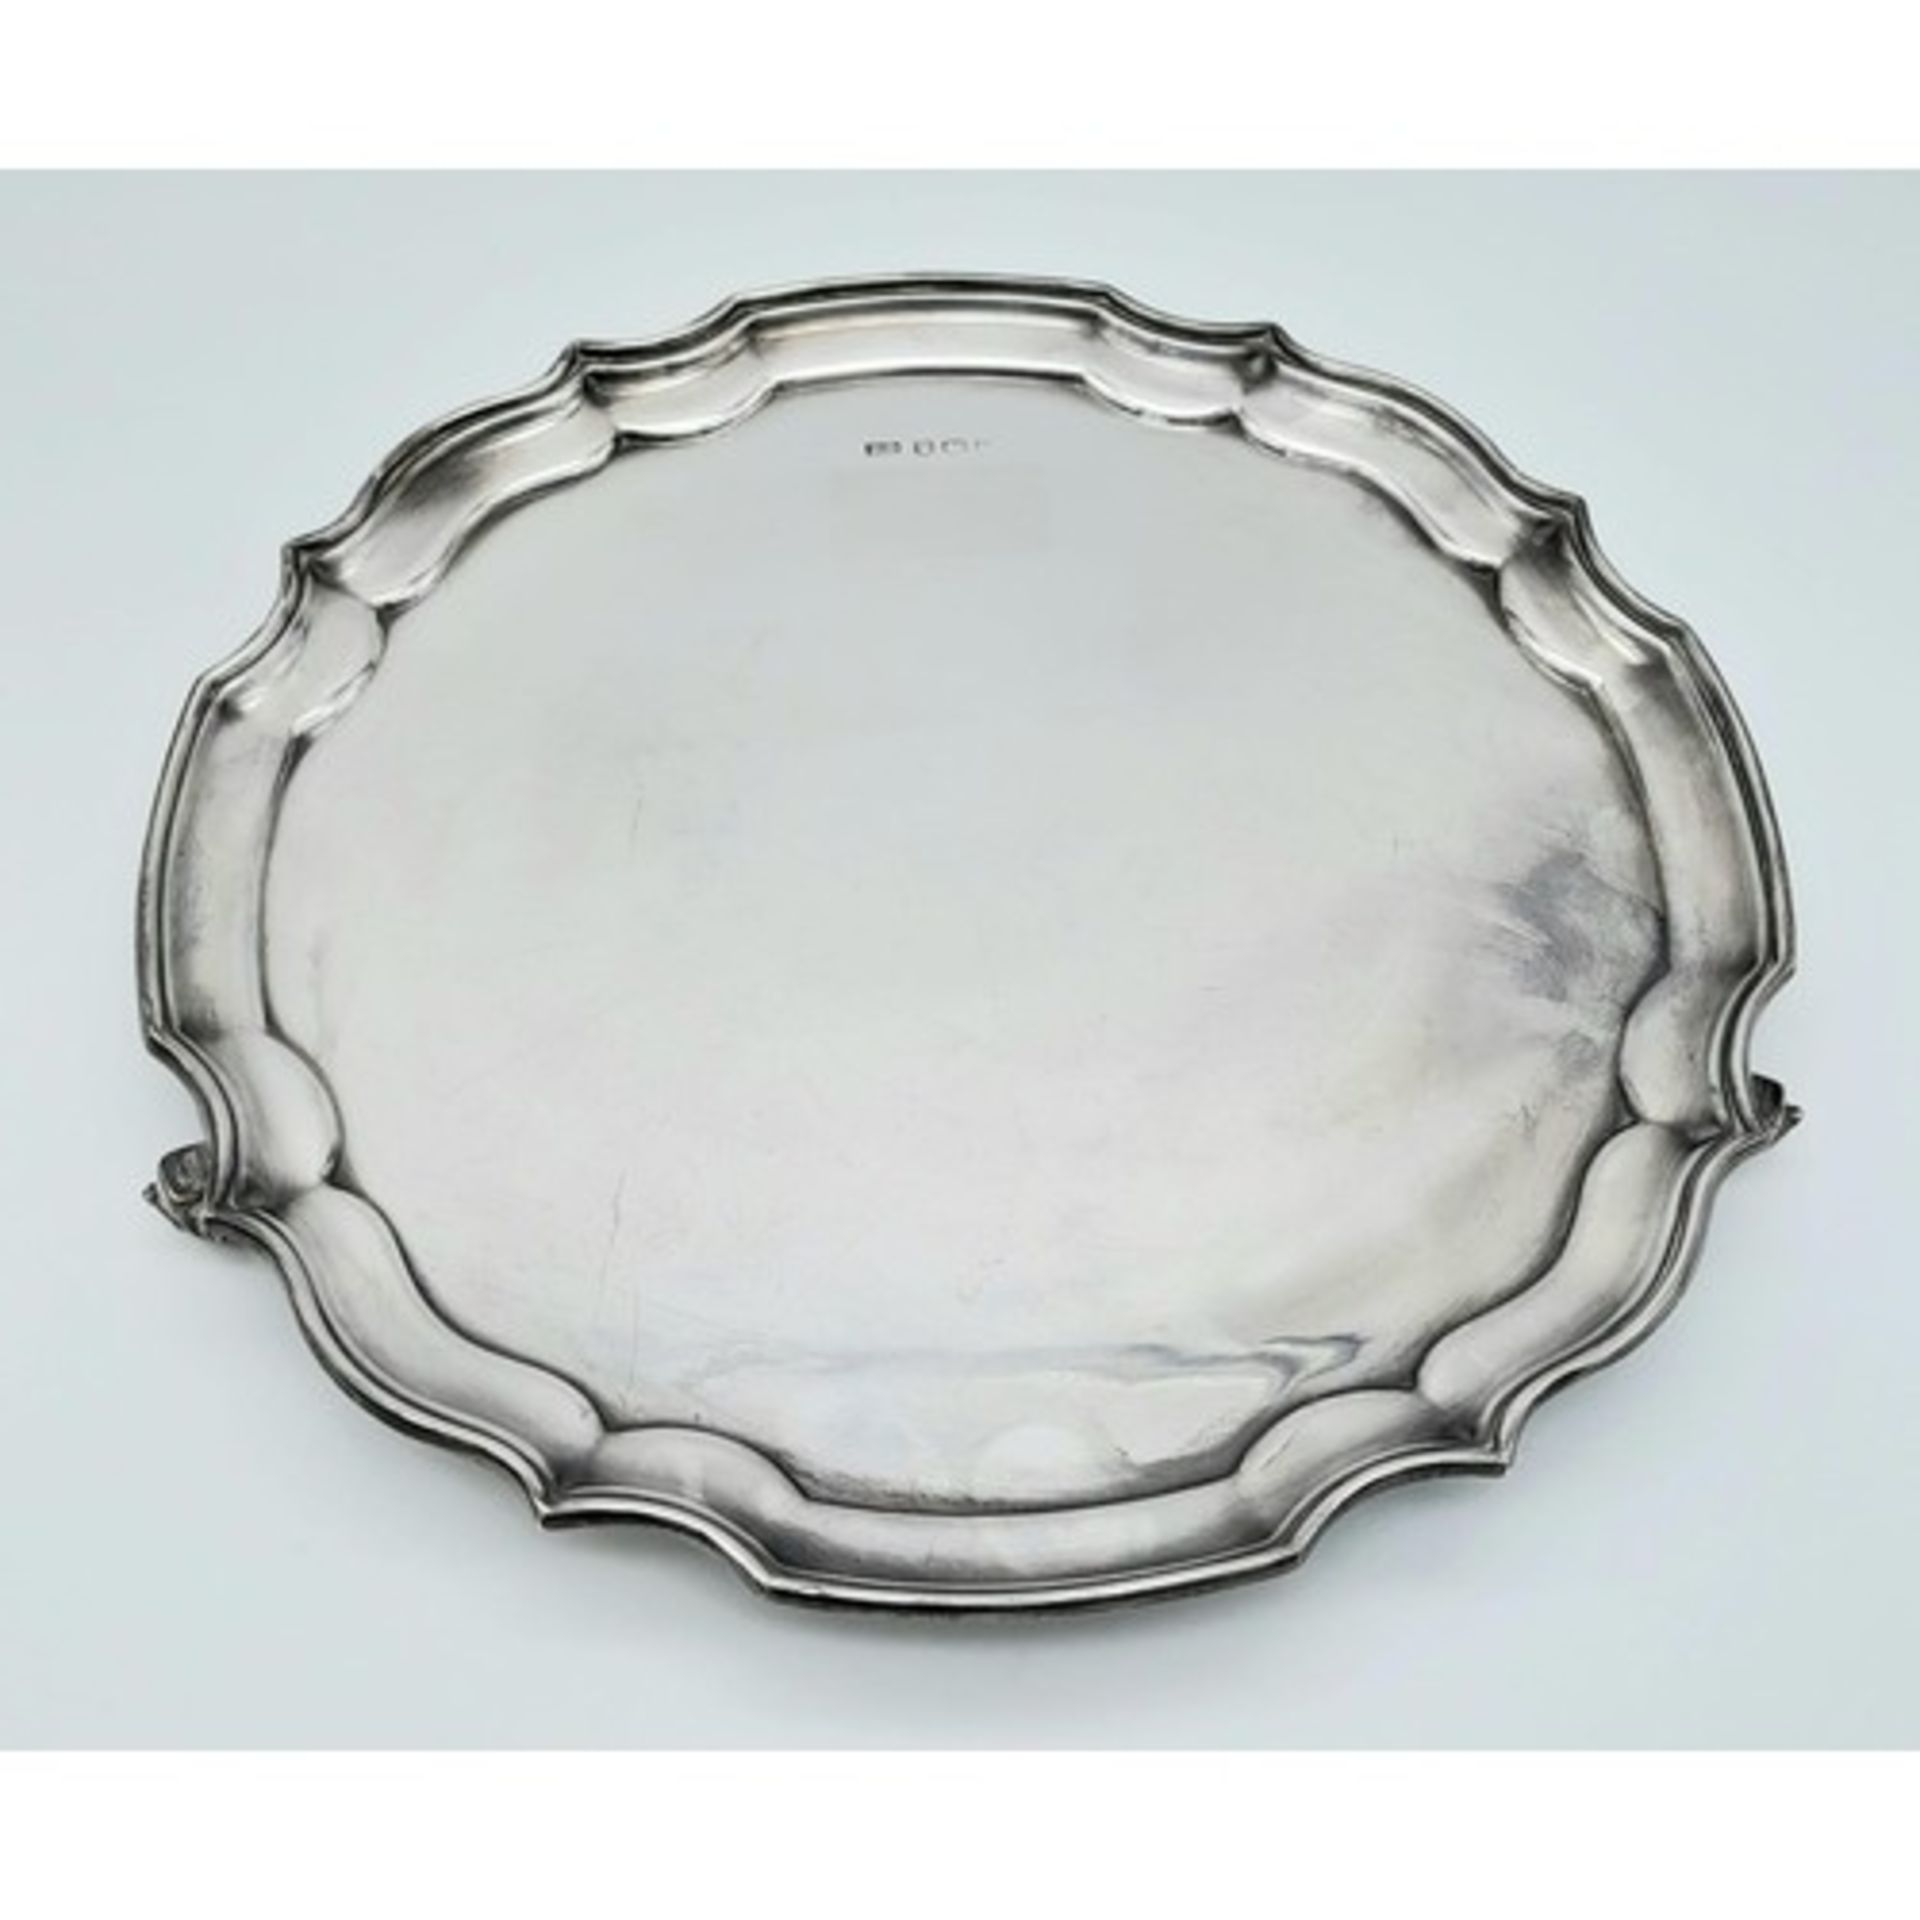 A SOLID SILVER PLATTER DATED 1973 AND MADE IN SHEFFIELD . 518g. 25cms DIAMETER